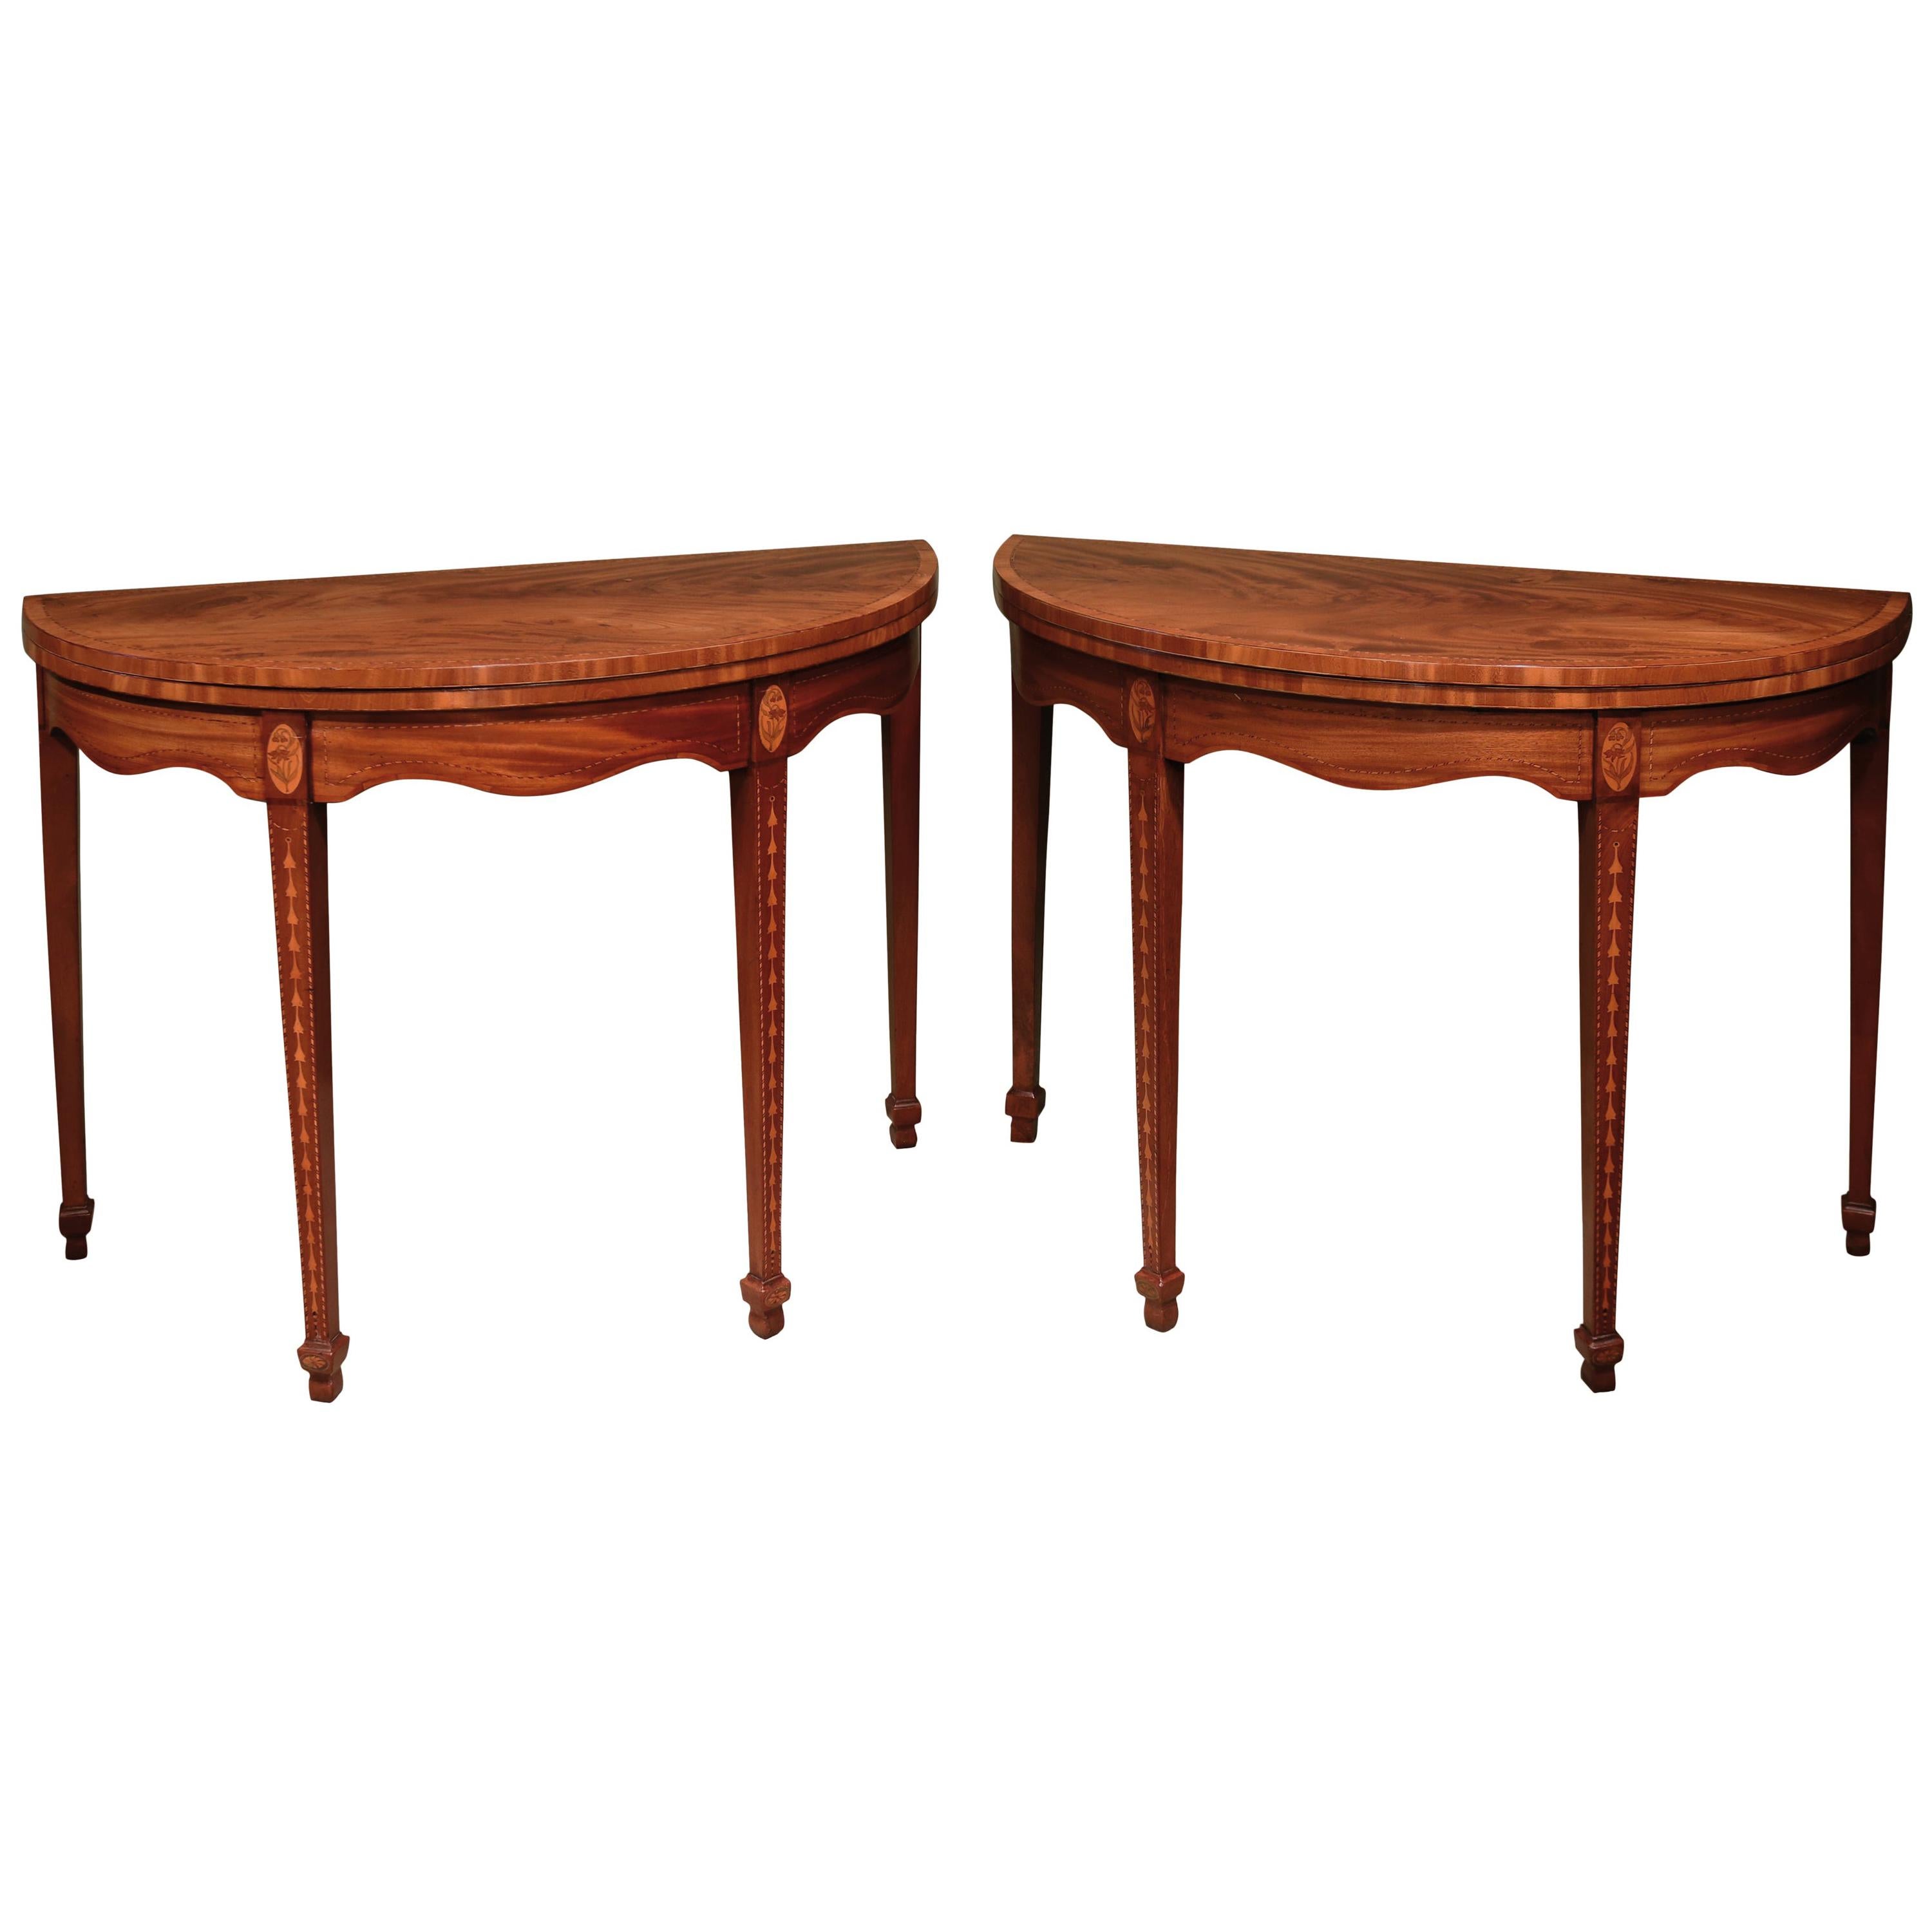 Pair of Late 18th Century Sheraton Period Figured Mahogany Card Tables